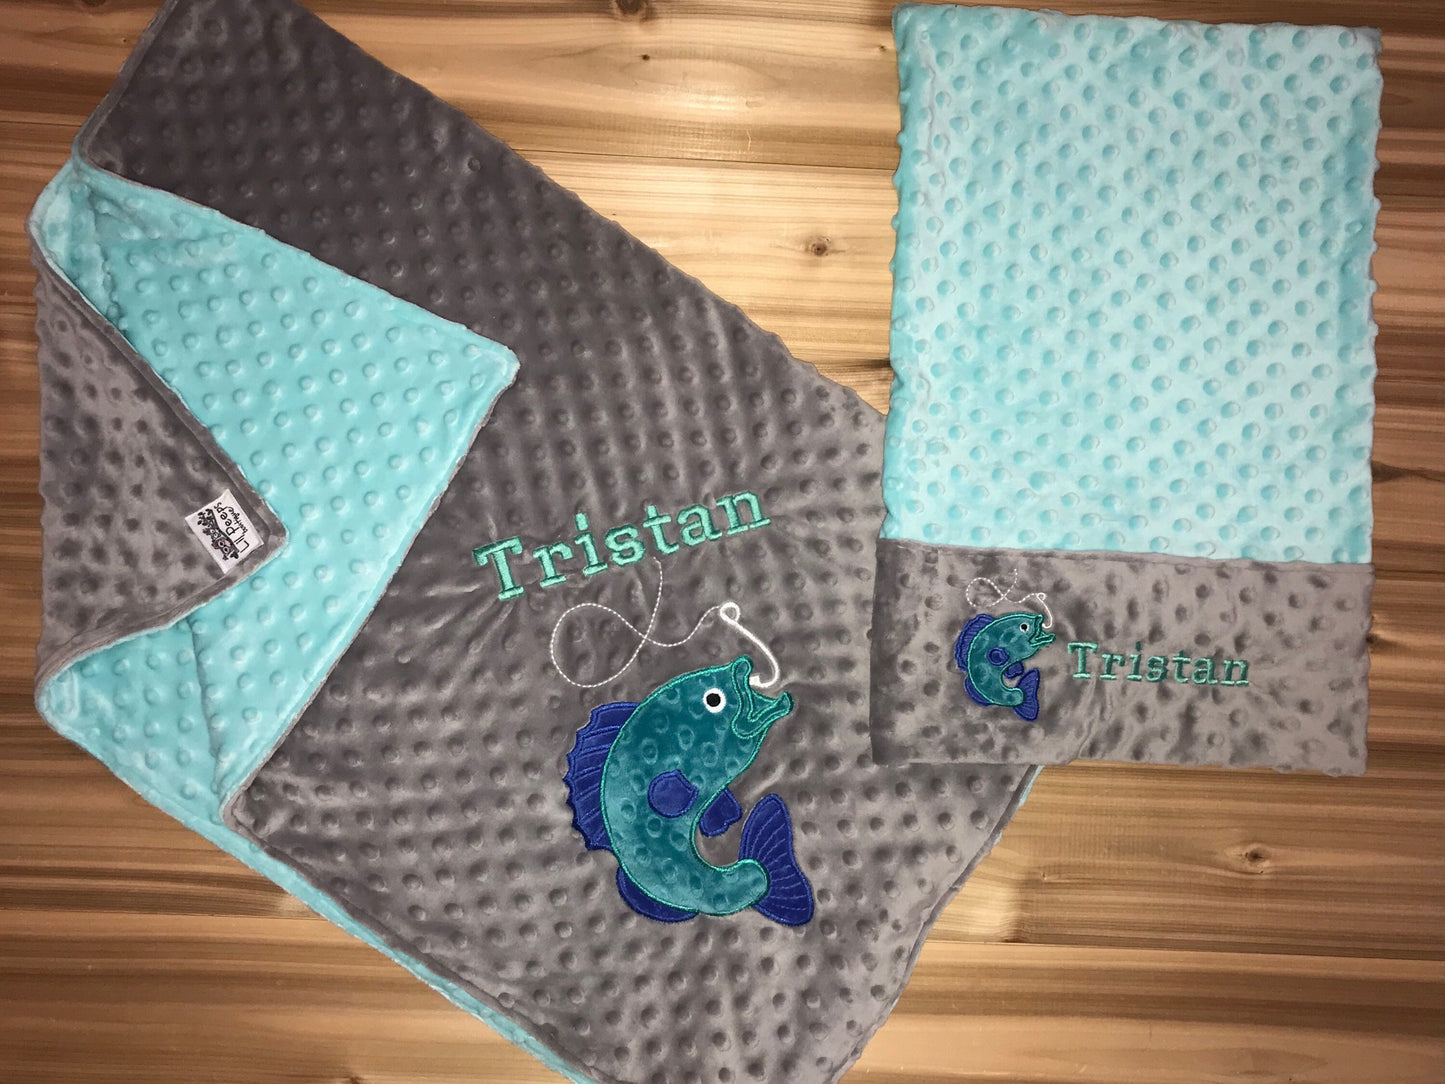 Personalized Minky Blanket and Pillowcase with embroidered Bass Fish - Travel or Standard Size